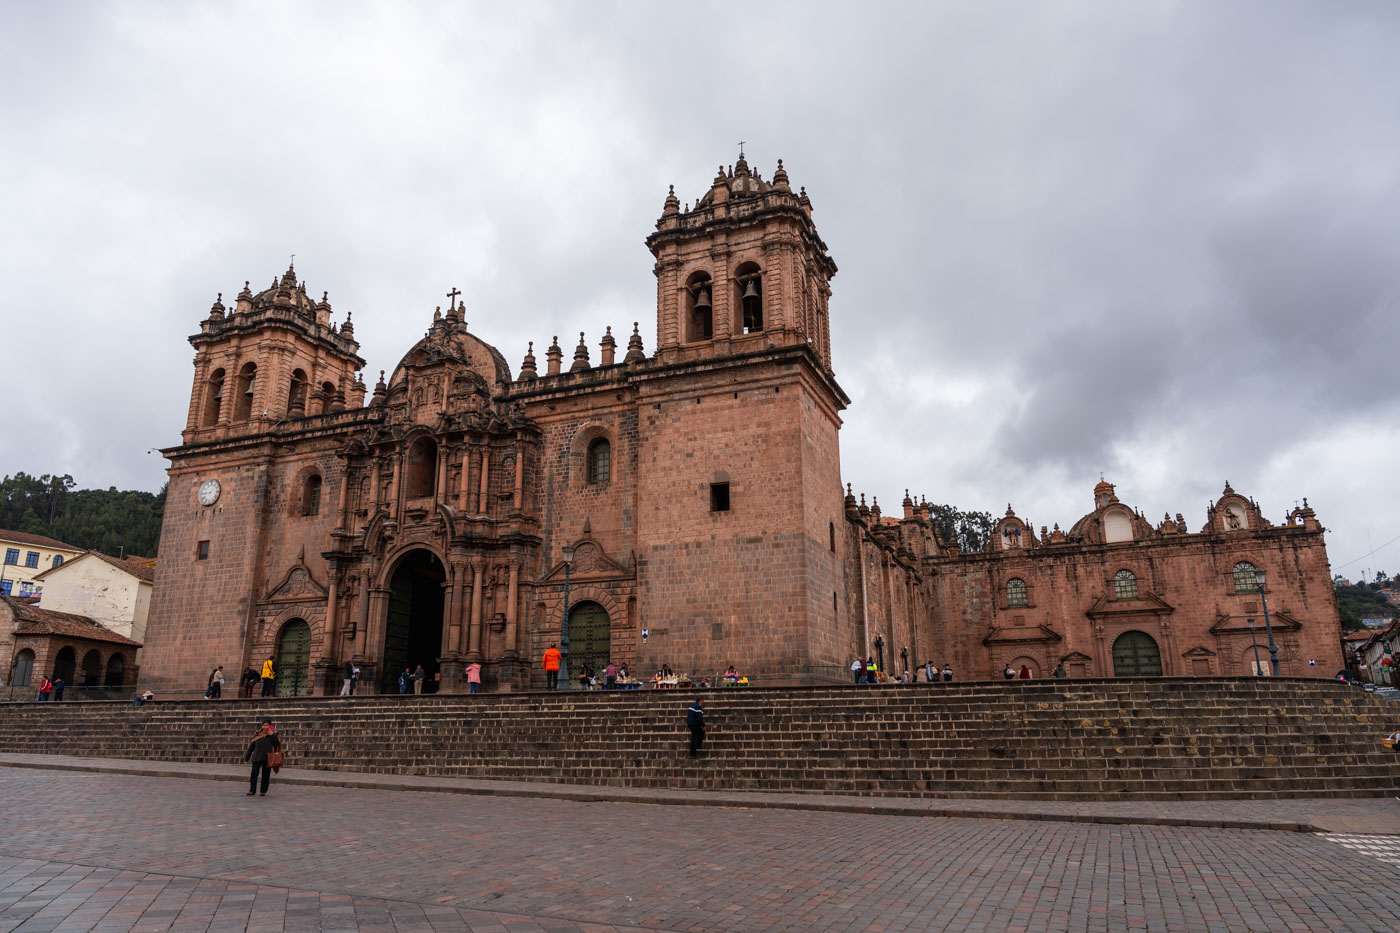 The grand architecture of the main cathedral in Cusco with tourists around it on an overcast day.